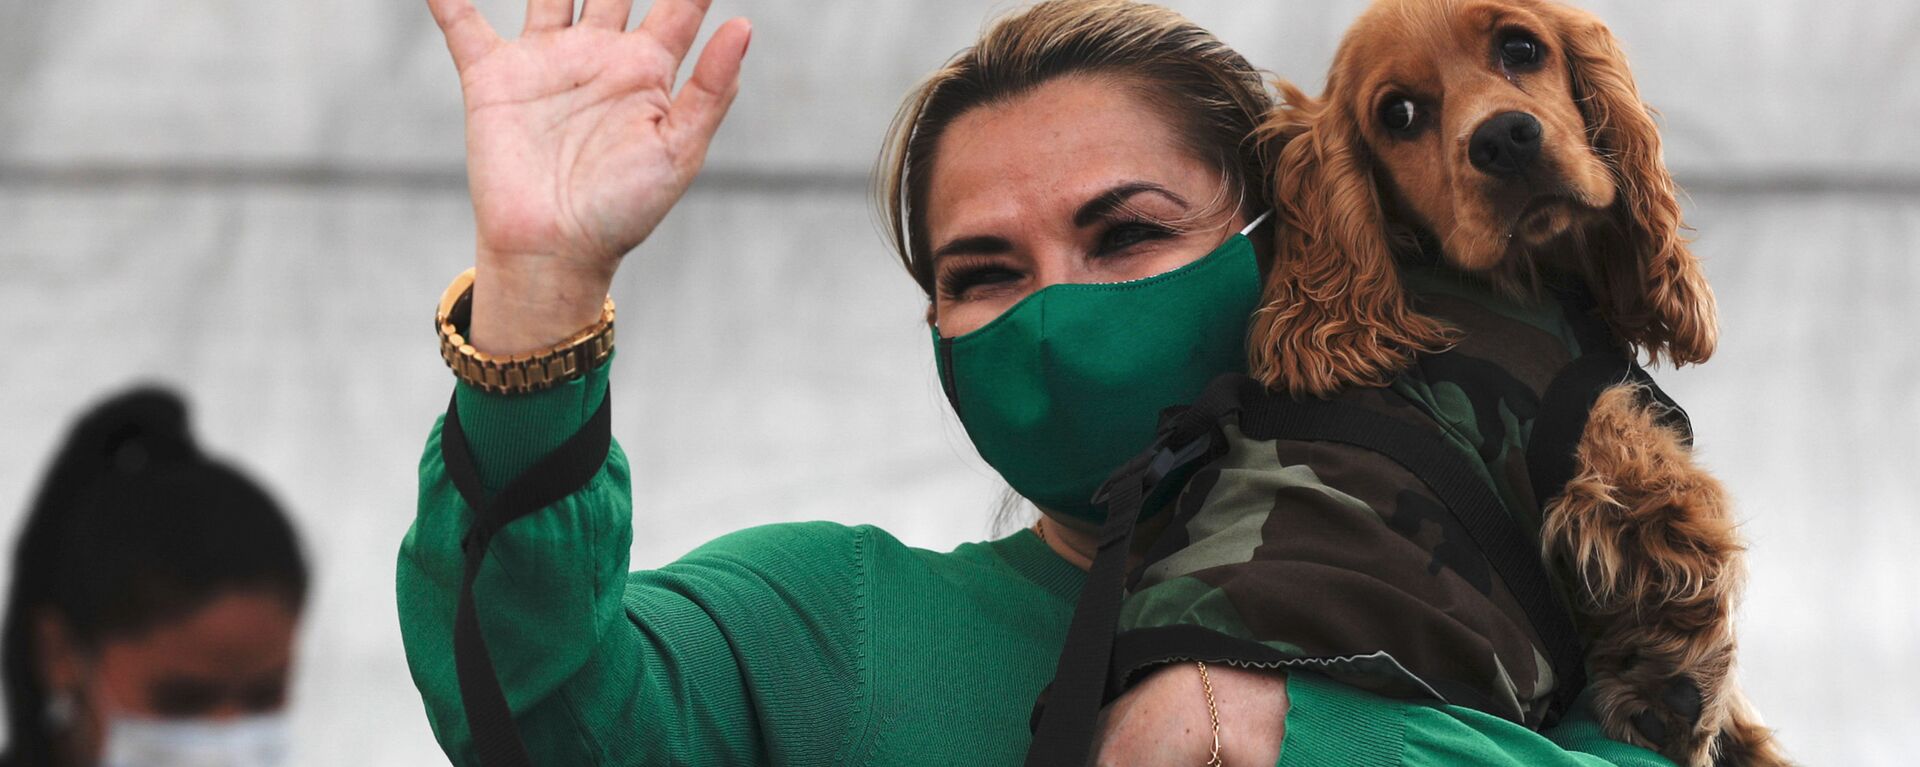 Bolivia's interim President Jeanine Anez, wearing a mask amid the new coronavirus pandemic, carries her dog as she greets people during an announcement to create a shelter for abandoned animals in La Paz, Bolivia, Sunday, Sept. 20, 2020. - Sputnik International, 1920, 10.06.2021